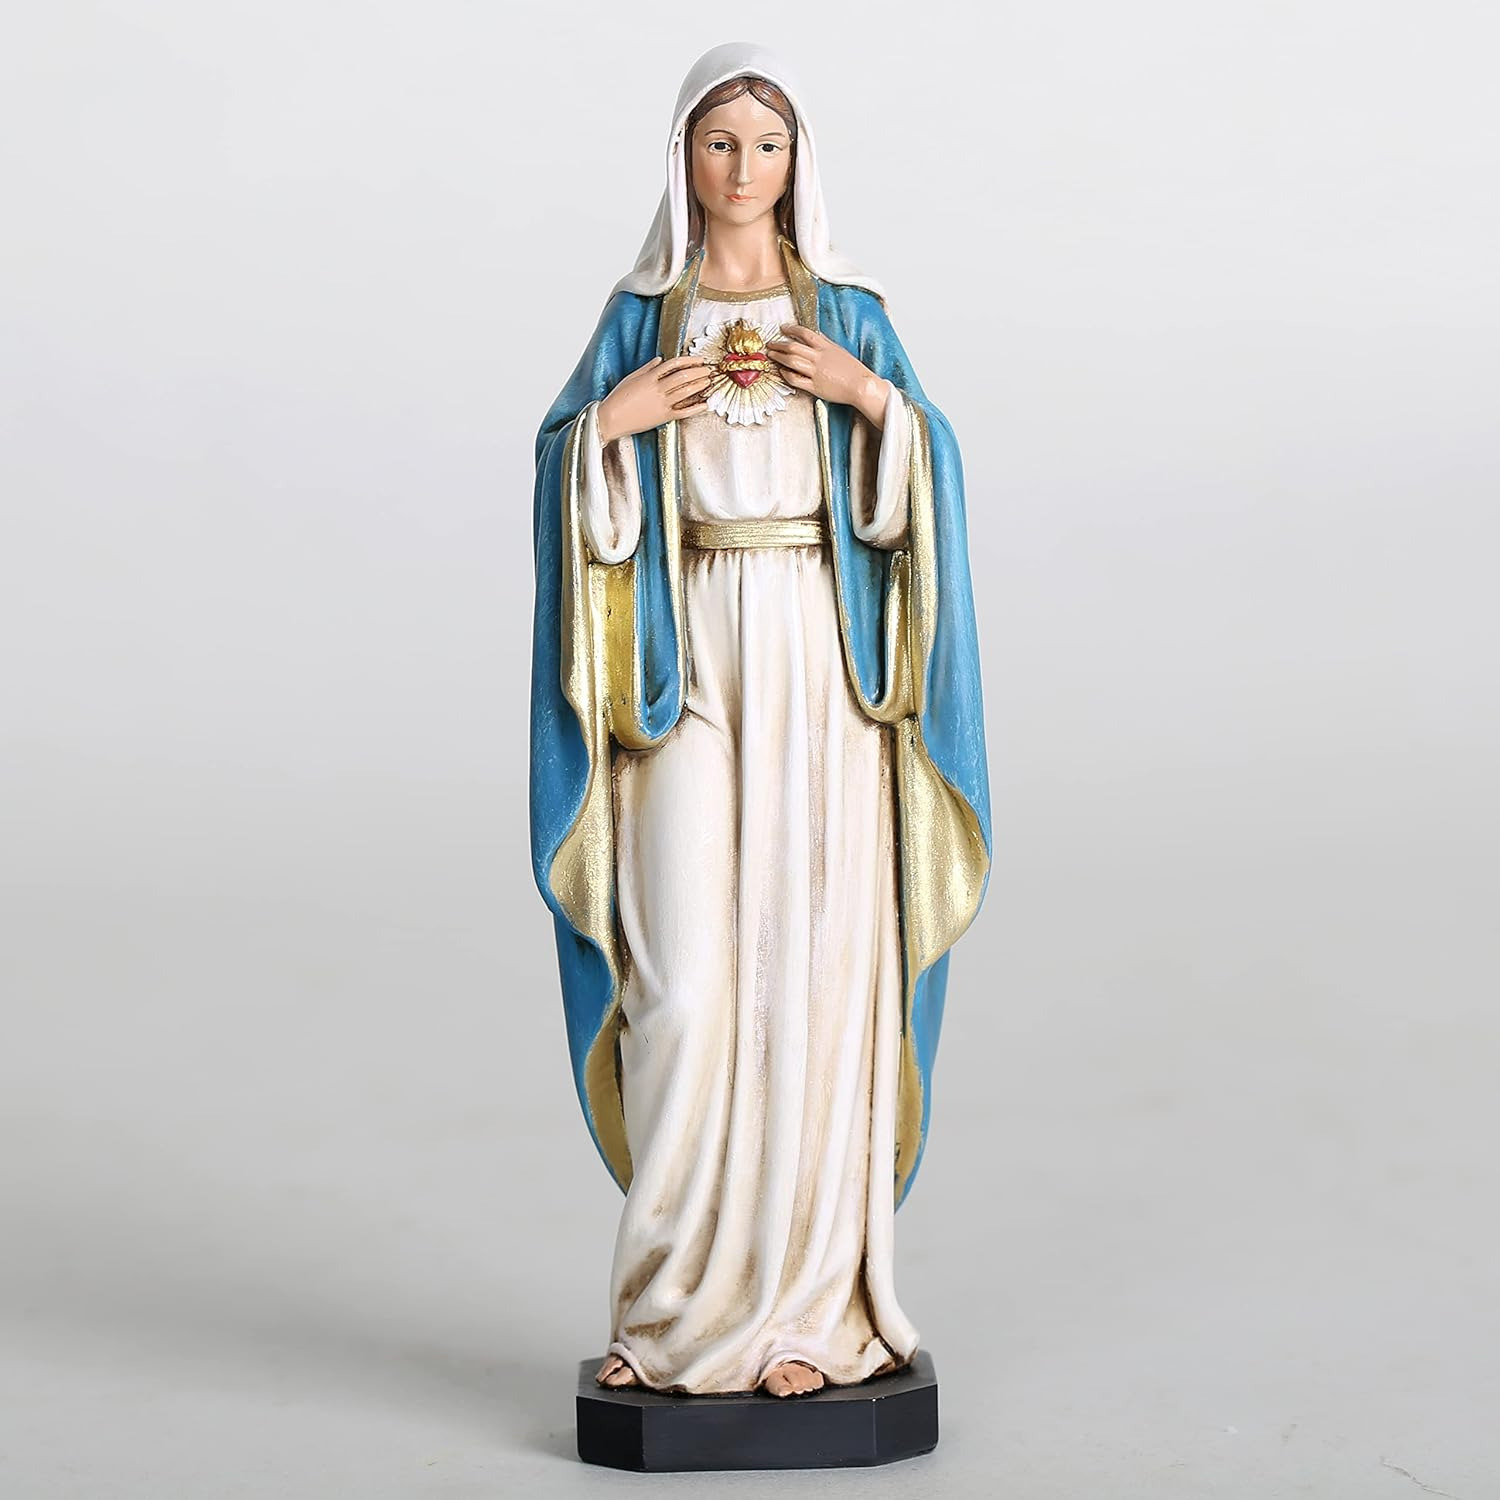 Catholic Immaculate Heart of Mary Figure, Virgin Mary Statue, Blessed Mother for